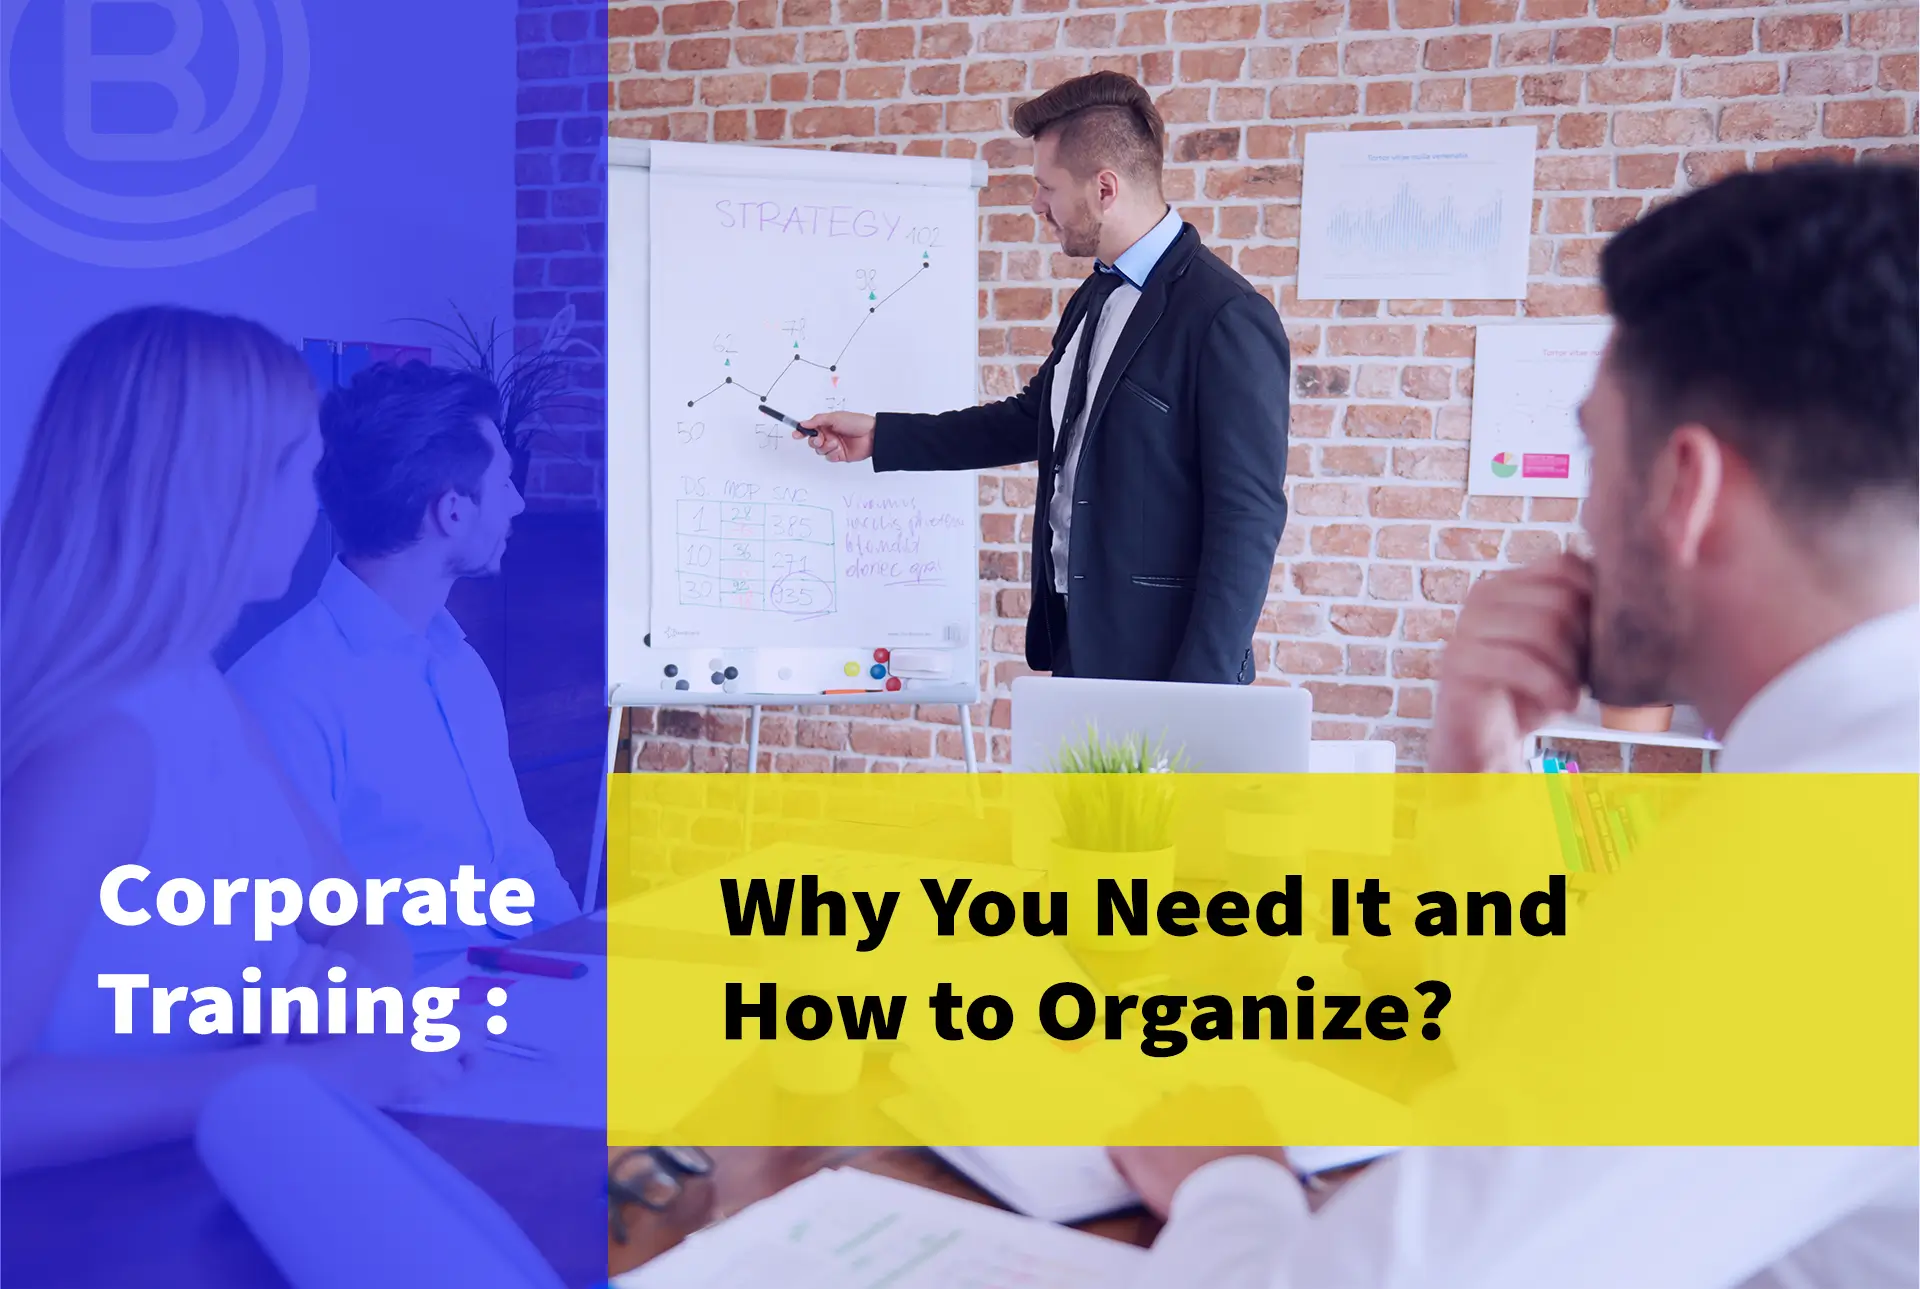 Corporate Training: Why You Need It and How to Organize